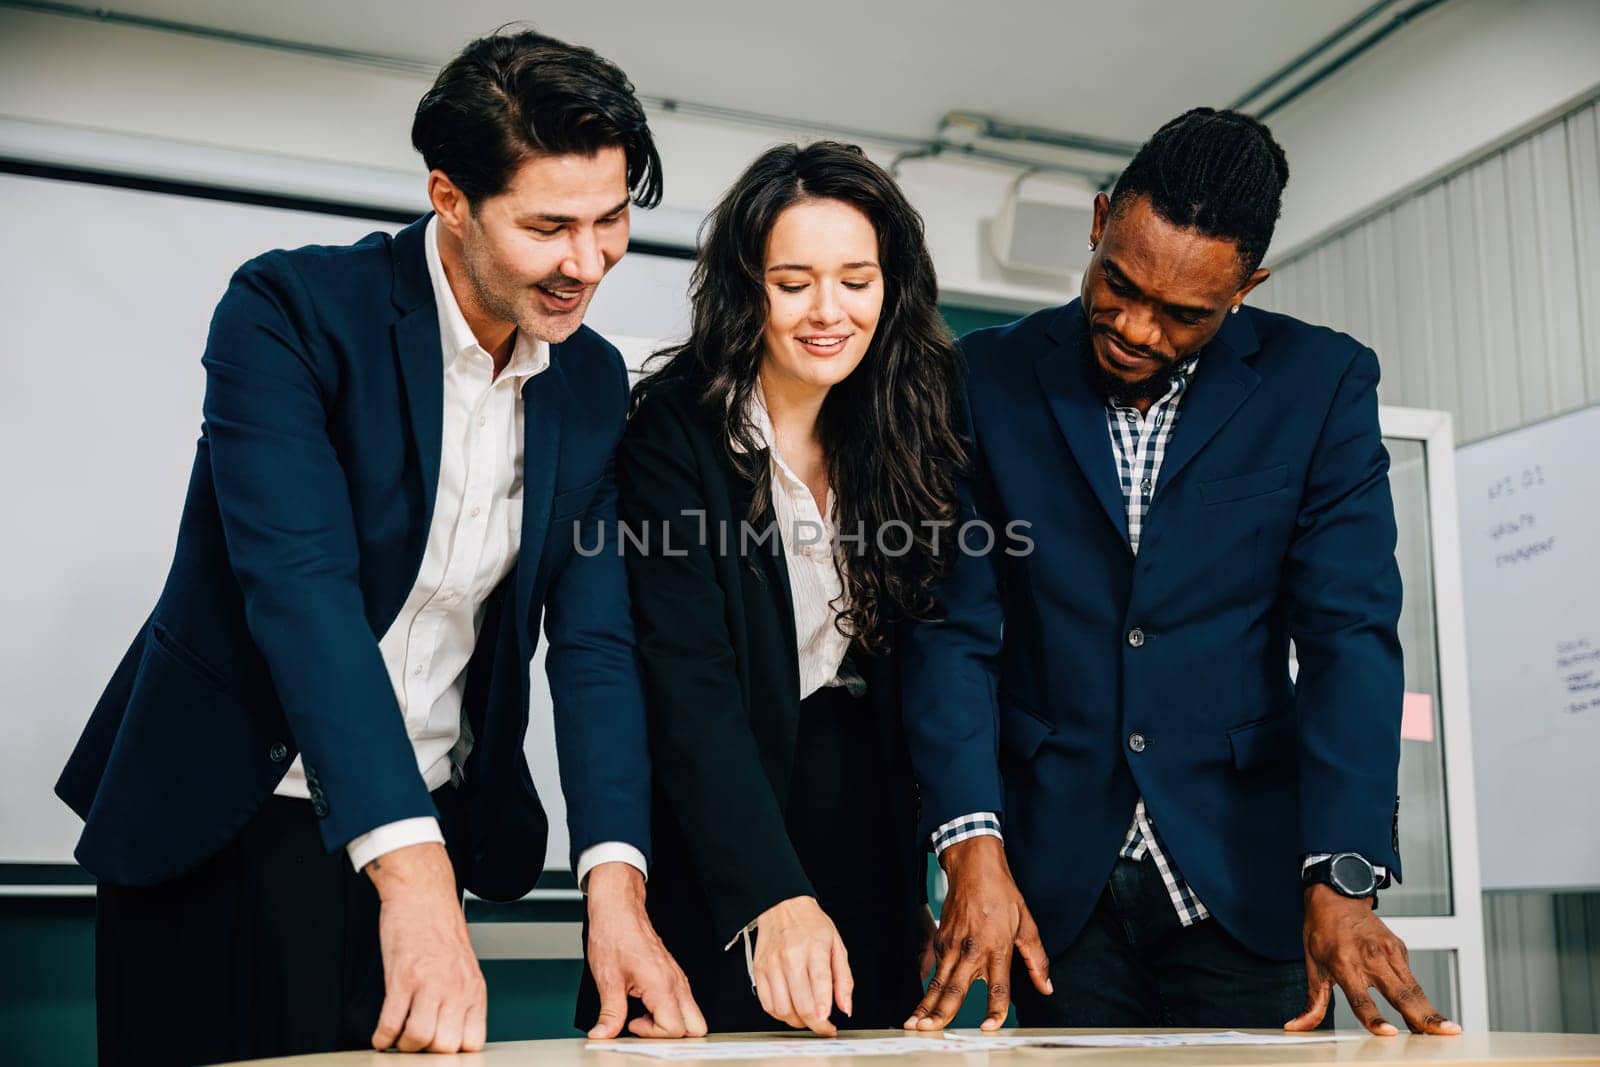 At a conference room desk, business colleagues stand, actively discussing and planning. Teamwork, diversity, and leadership are evident in this successful gathering. by Sorapop